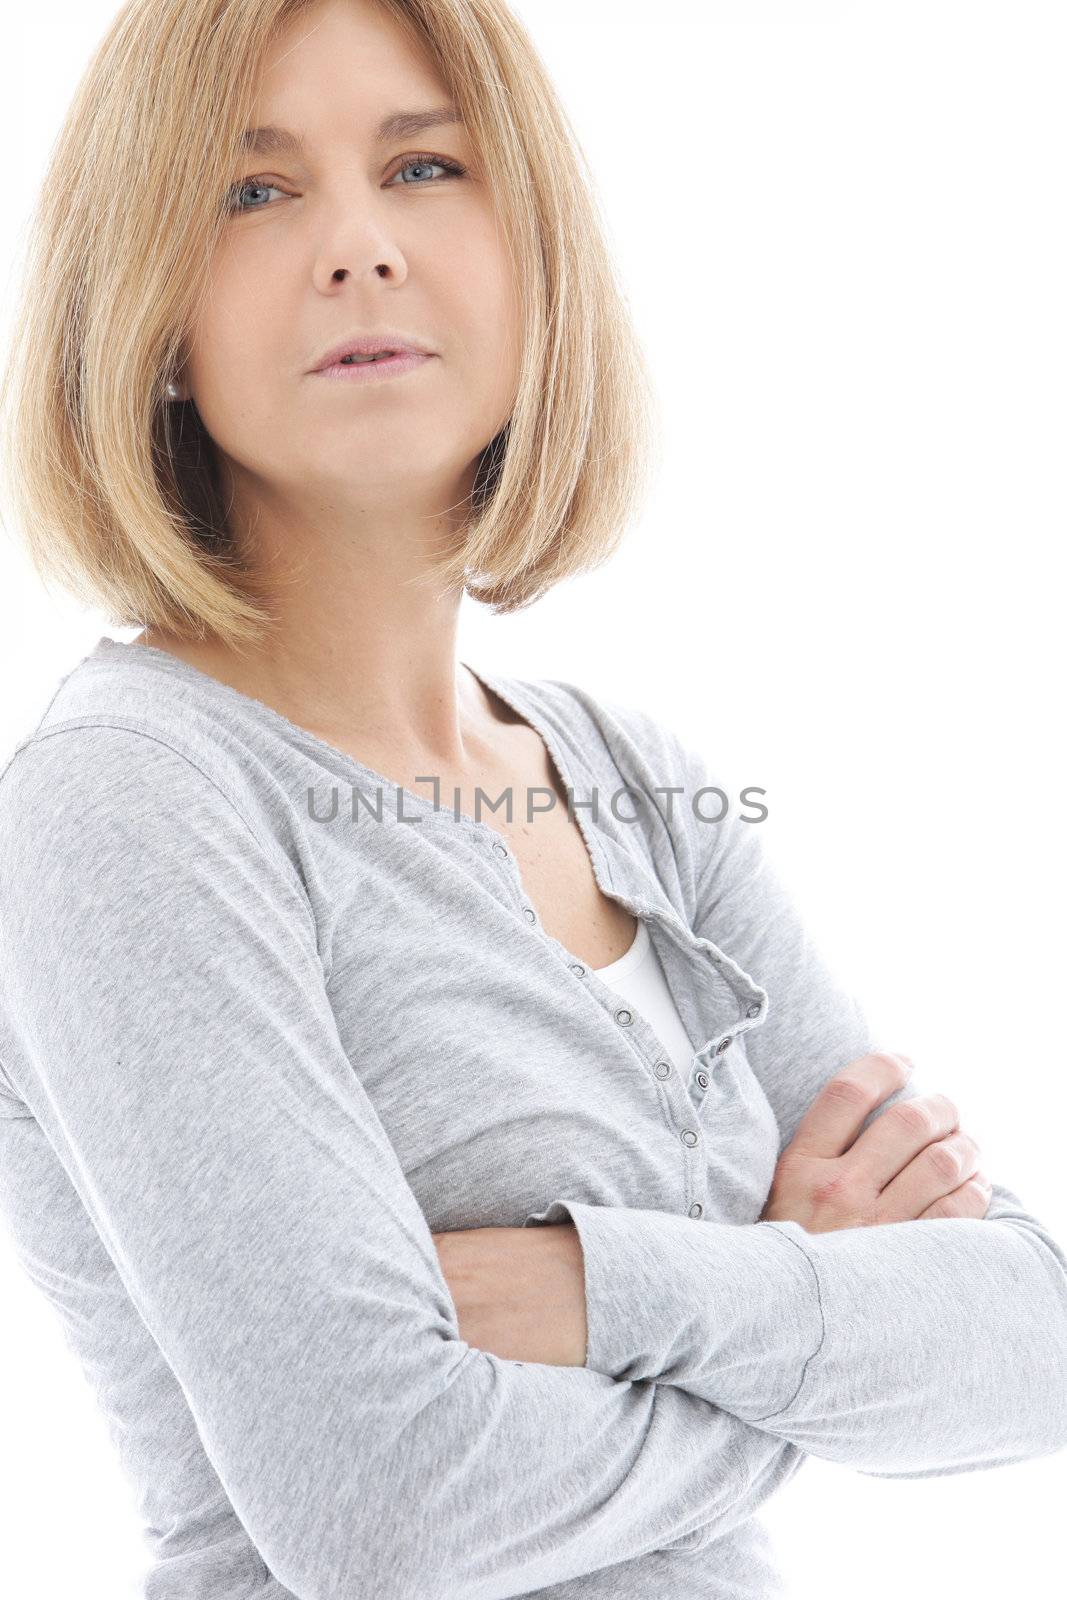 Thoughtful woman with shoulder length blond hair standing sideways with folded arms looking at the camera, isolated on white